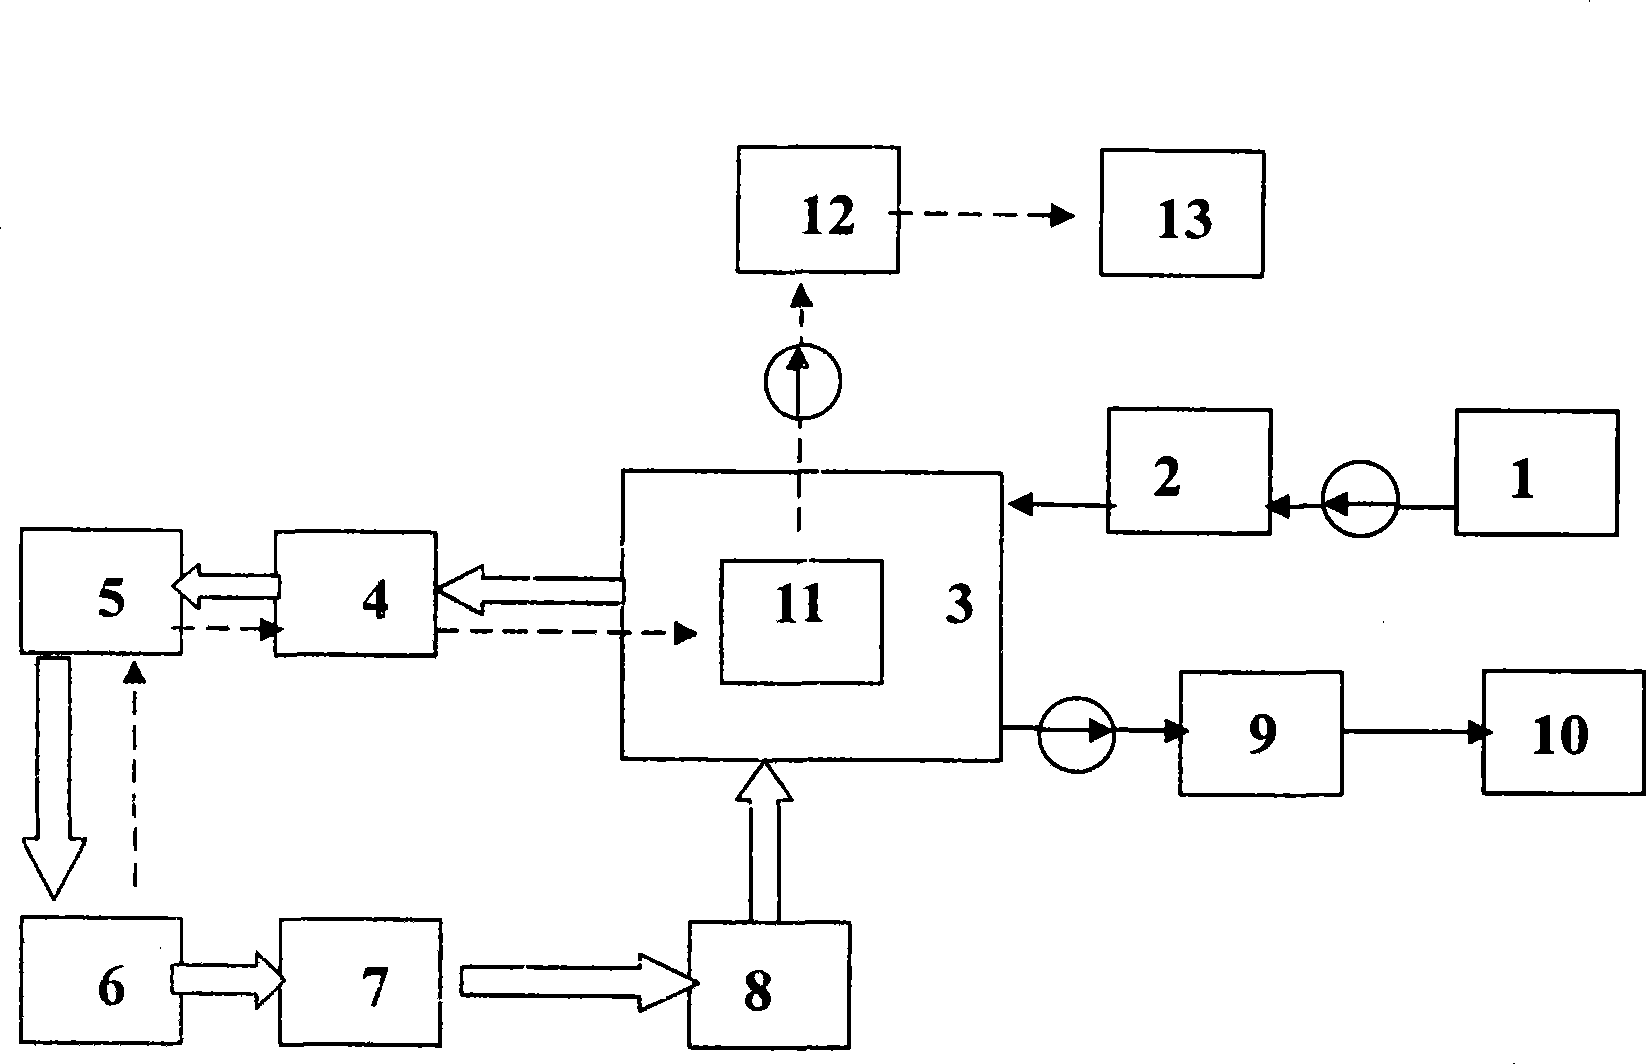 Process flow for generating electricity and supplying water by using sewage water heat energy with generating cost less than fire power